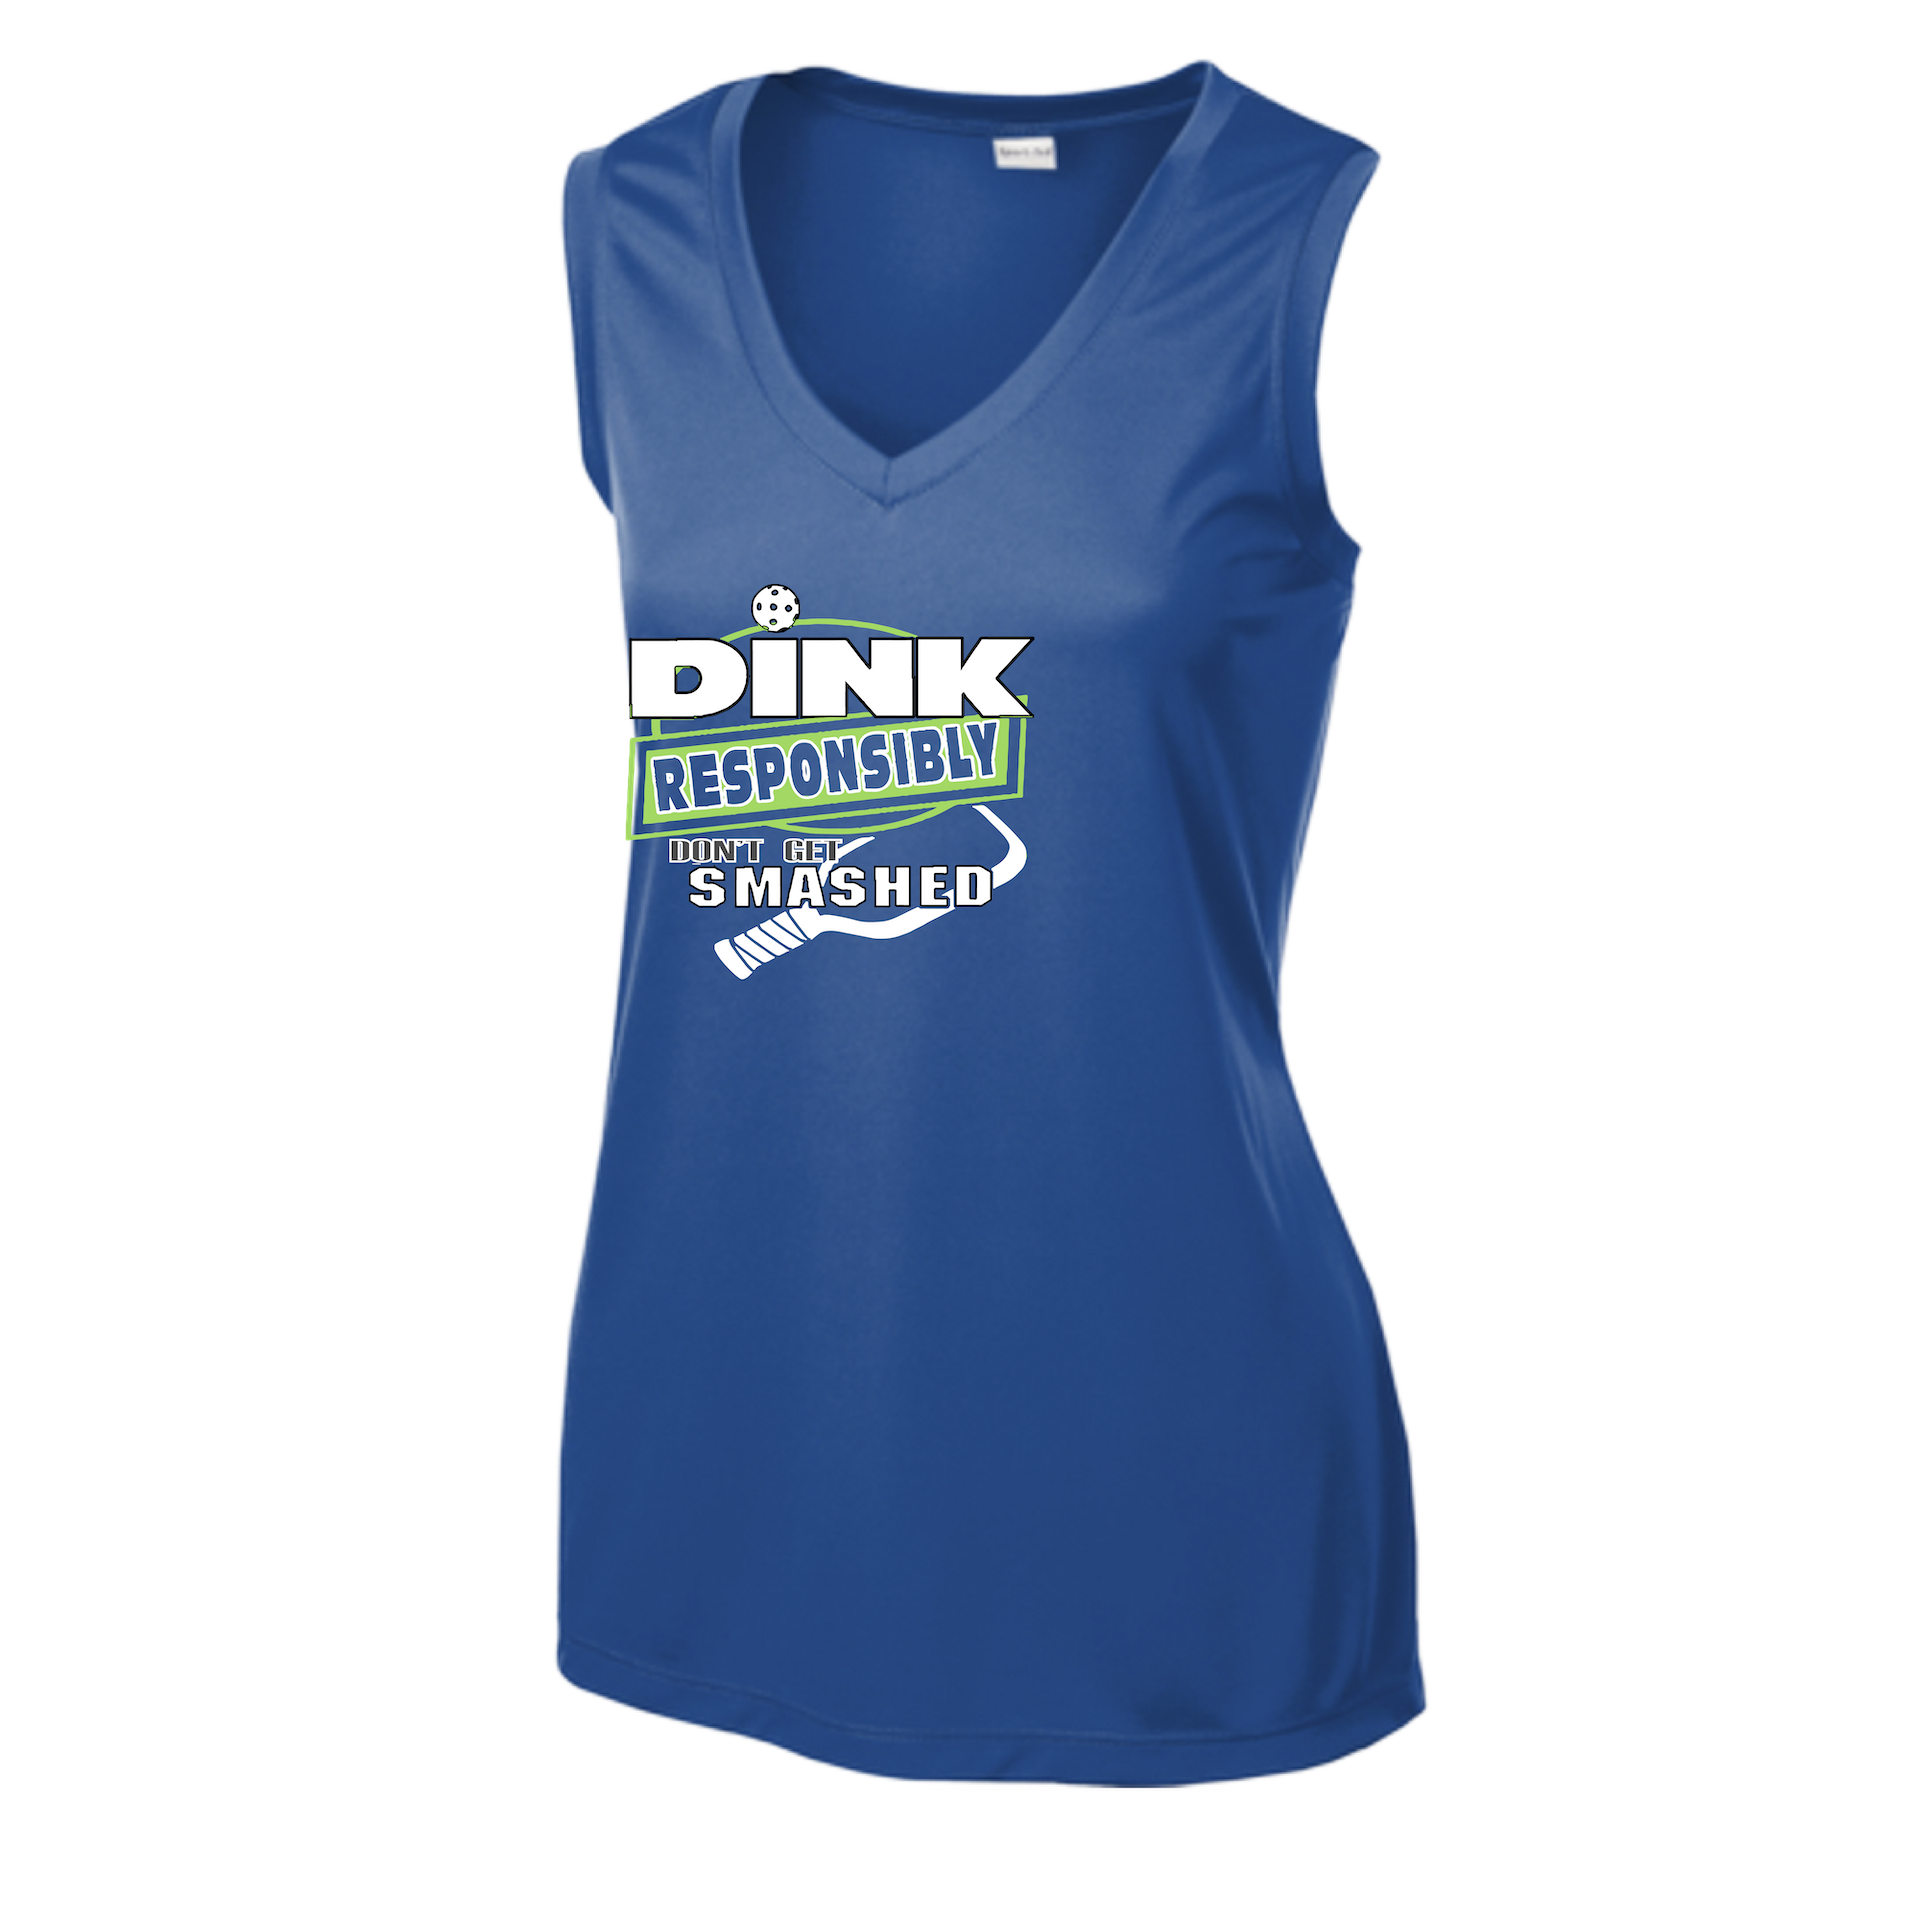 Pickleball Design: Dink Responsibly - Don't Get Smashed  Women's Style: Sleeveless Tank  Shirts are lightweight, roomy and highly breathable. These moisture-wicking shirts are designed for athletic performance. They feature PosiCharge technology to lock in color and prevent logos from fading. Removable tag and set-in sleeves for comfort.